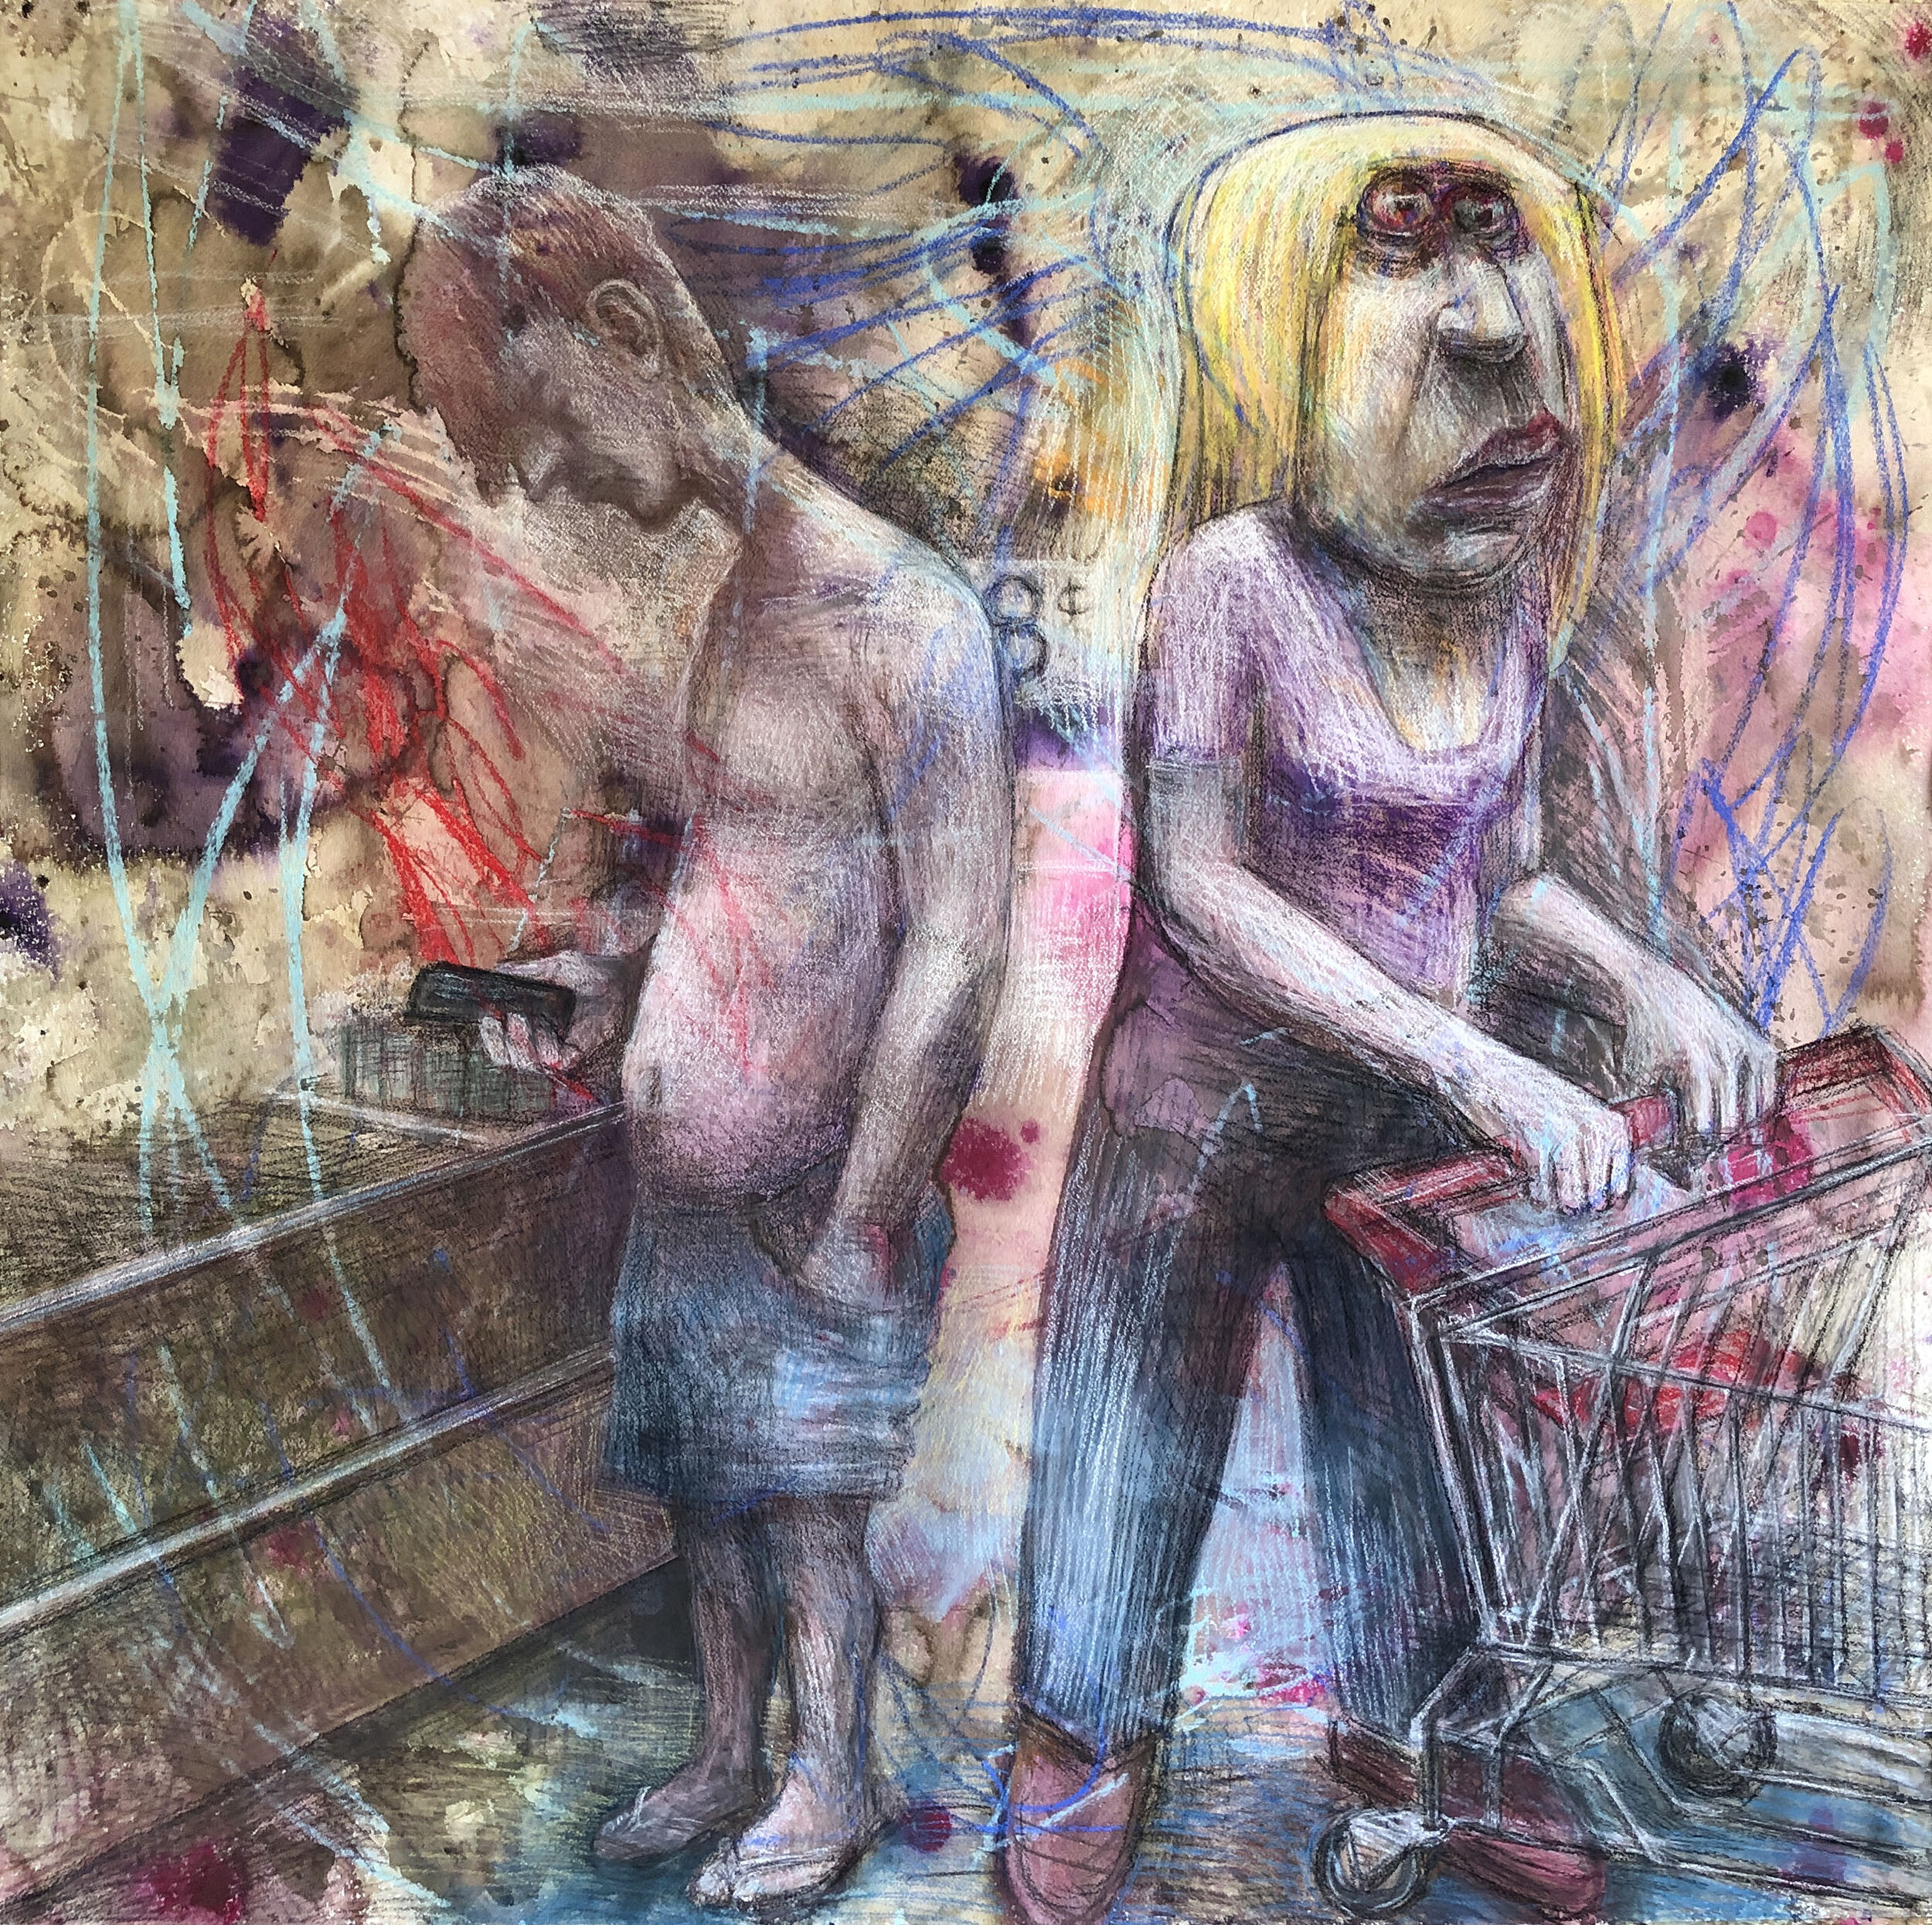 "Lost in a Supermarket" 2021 42" x42" Mixed media on paper